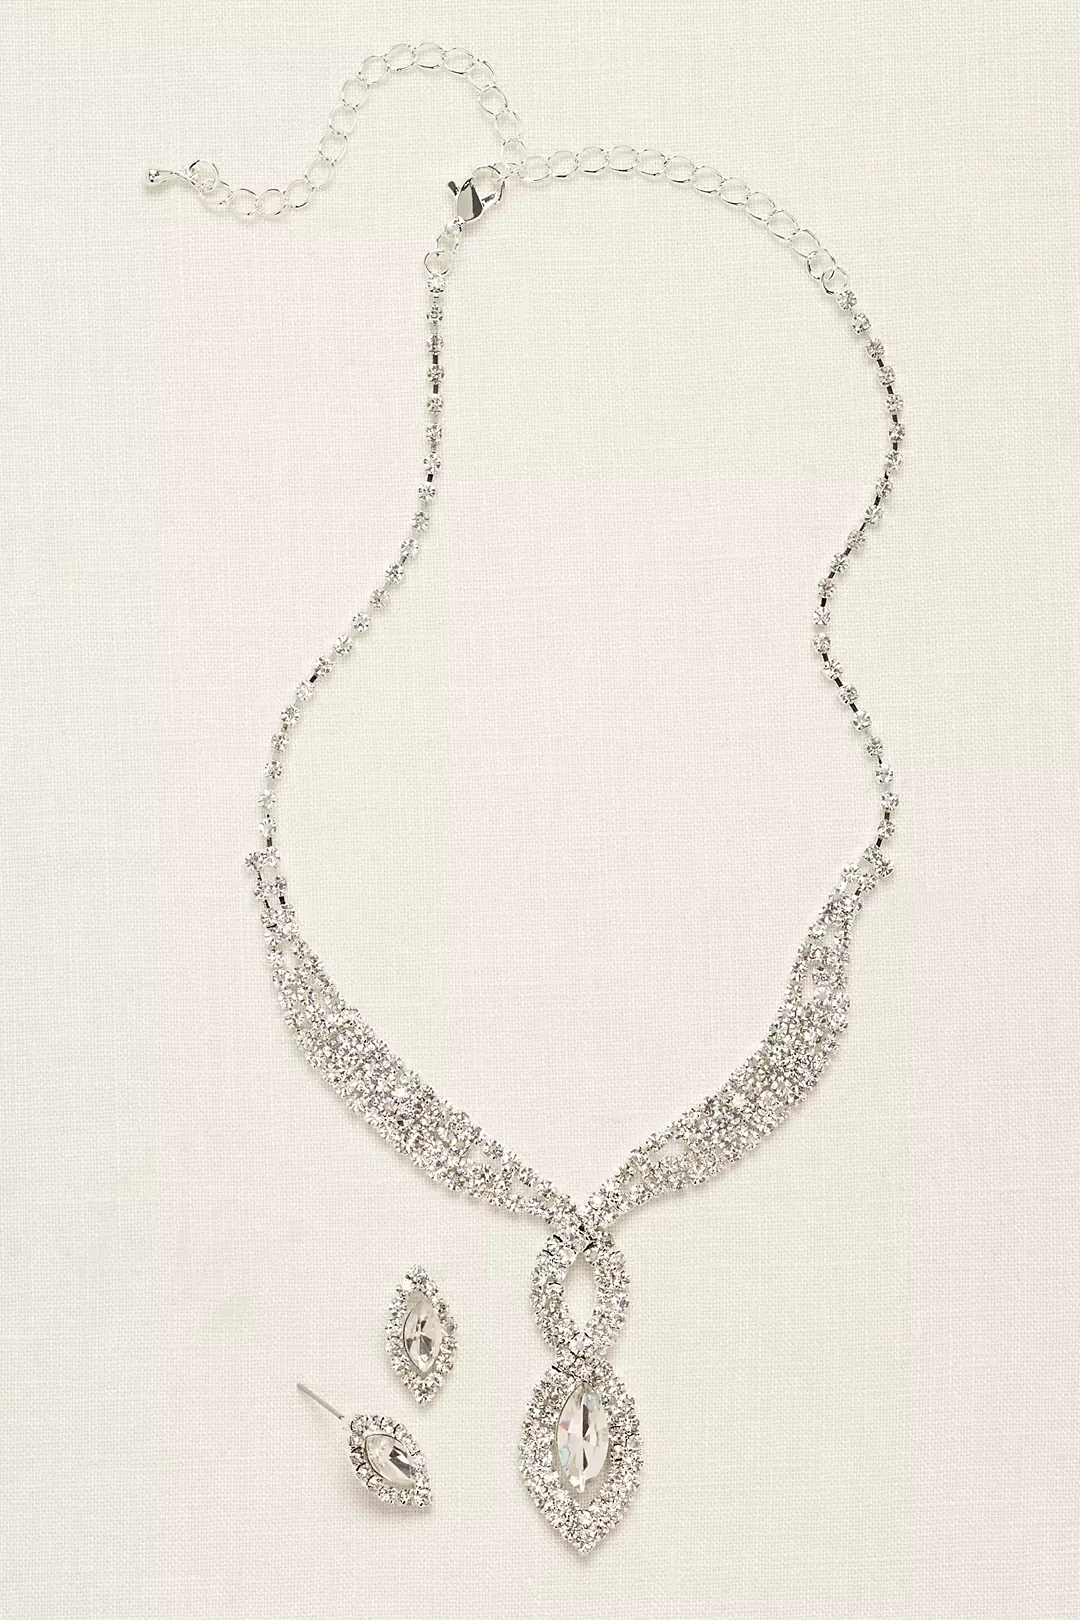 Woven Pave Crystal Necklace and Earring Set Image 2